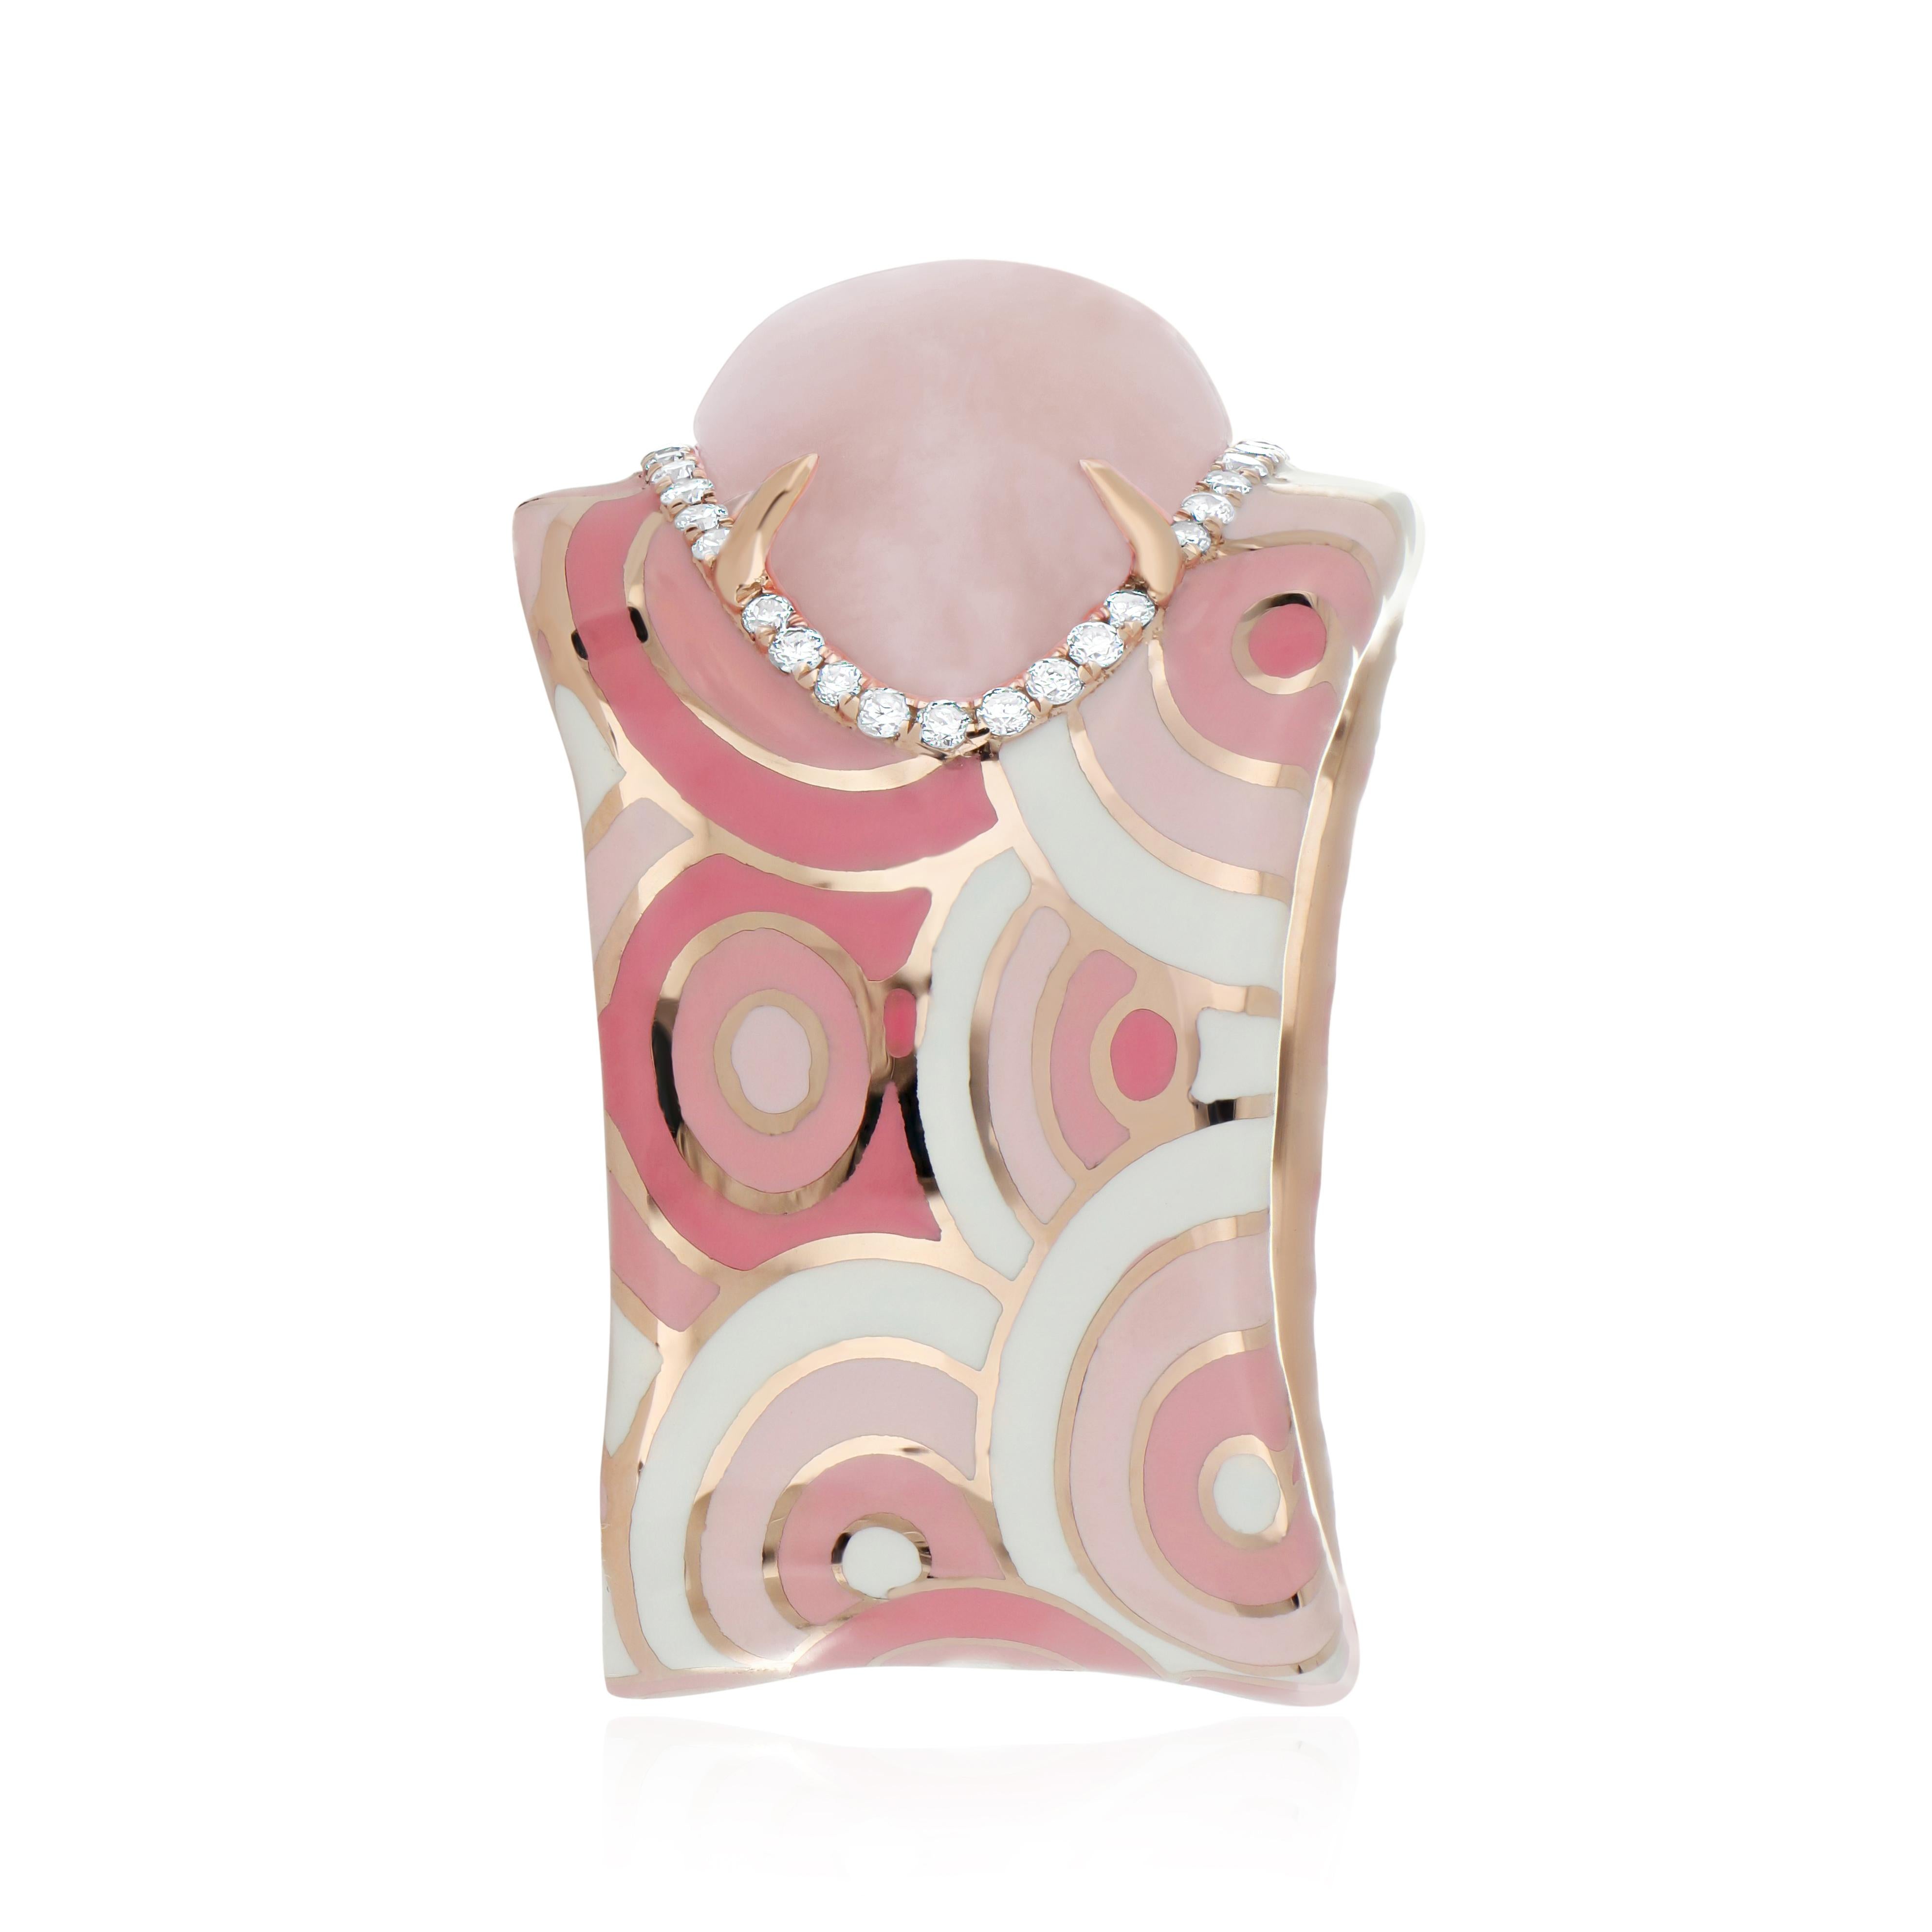 Uncut 5.08CT's Pink Opal & Diamond Ring with Enamel in 14k Rose Gold Hand-Crafted Ring For Sale